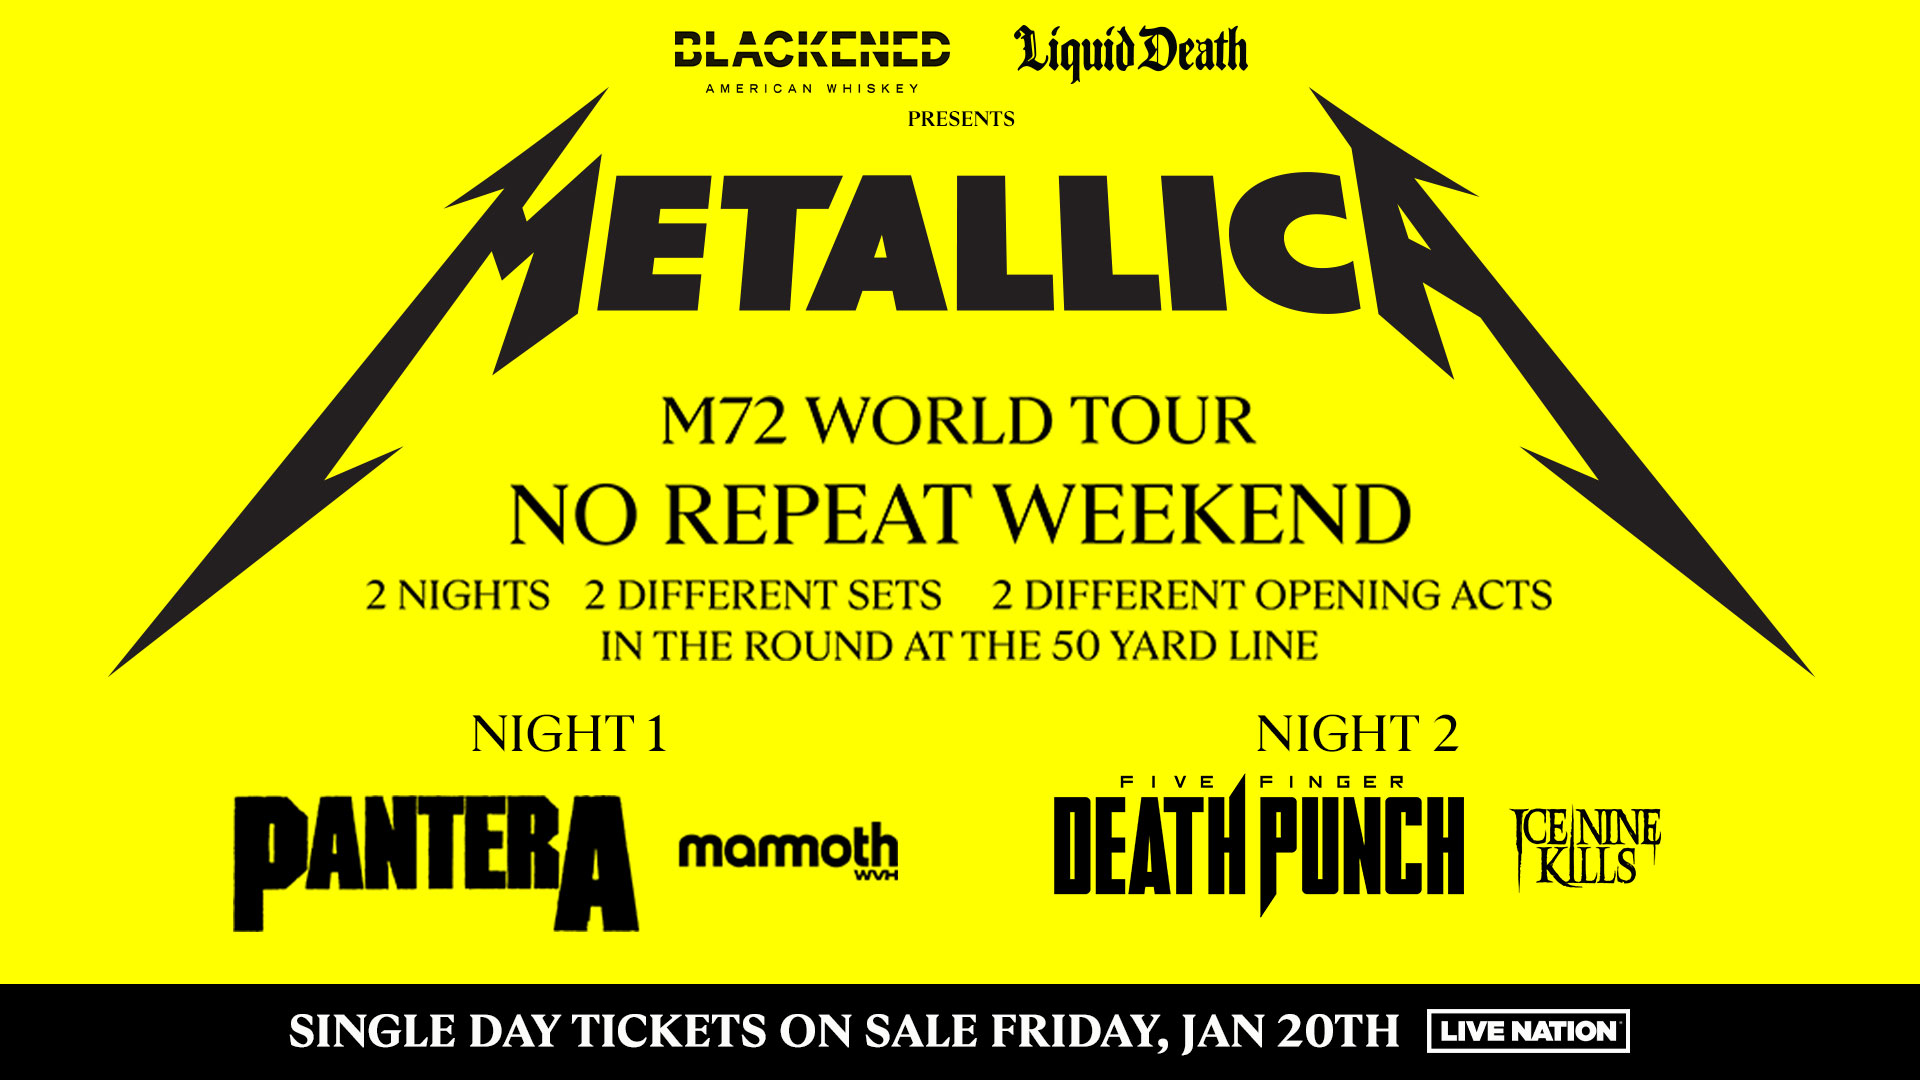 Blackened American Whiskey, Liquid Death Presents: Metallica M72 World Tour No Repeat Weekend. 2 nights, 2 different sets, 2 different opening acts. In the round at the 50 yard line. Night 1, Pantera. Mammoth WVM. Night 2, Five Finger Death Punch. Ice Nine Kills. Single day tickets on sale Friday, Jan 20th. Live Nation.